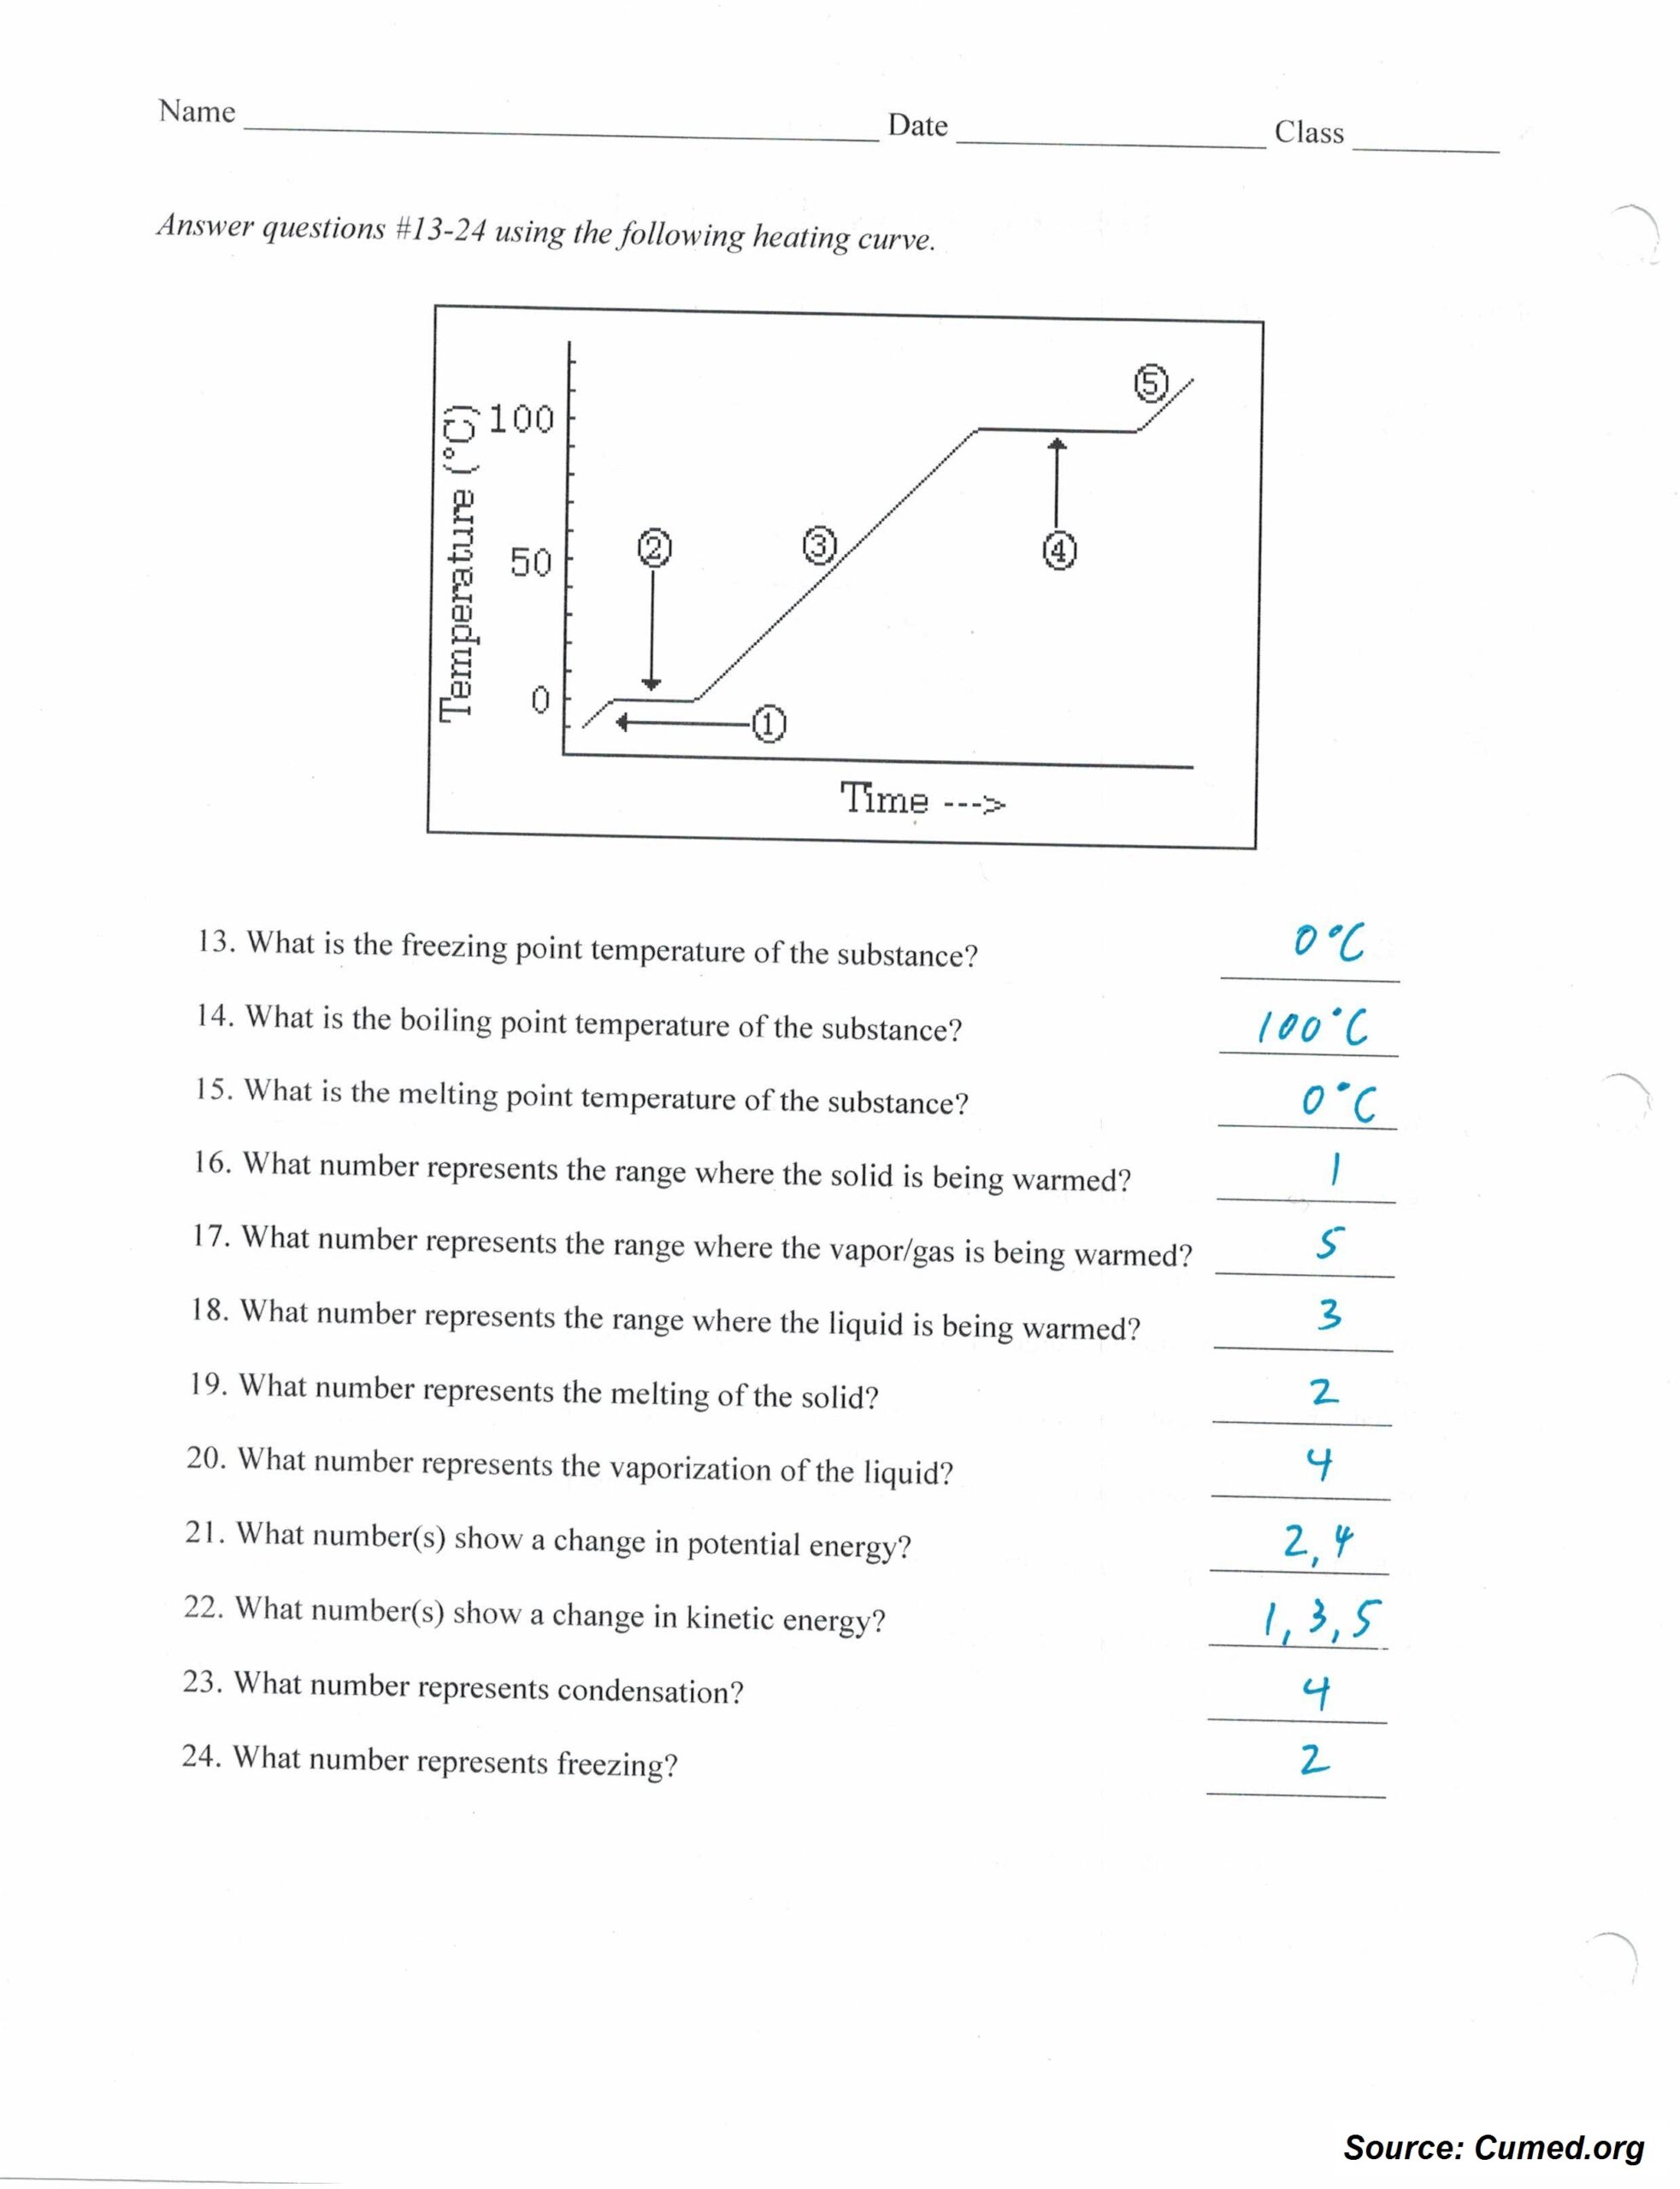 Heating Curve Worksheet Answers